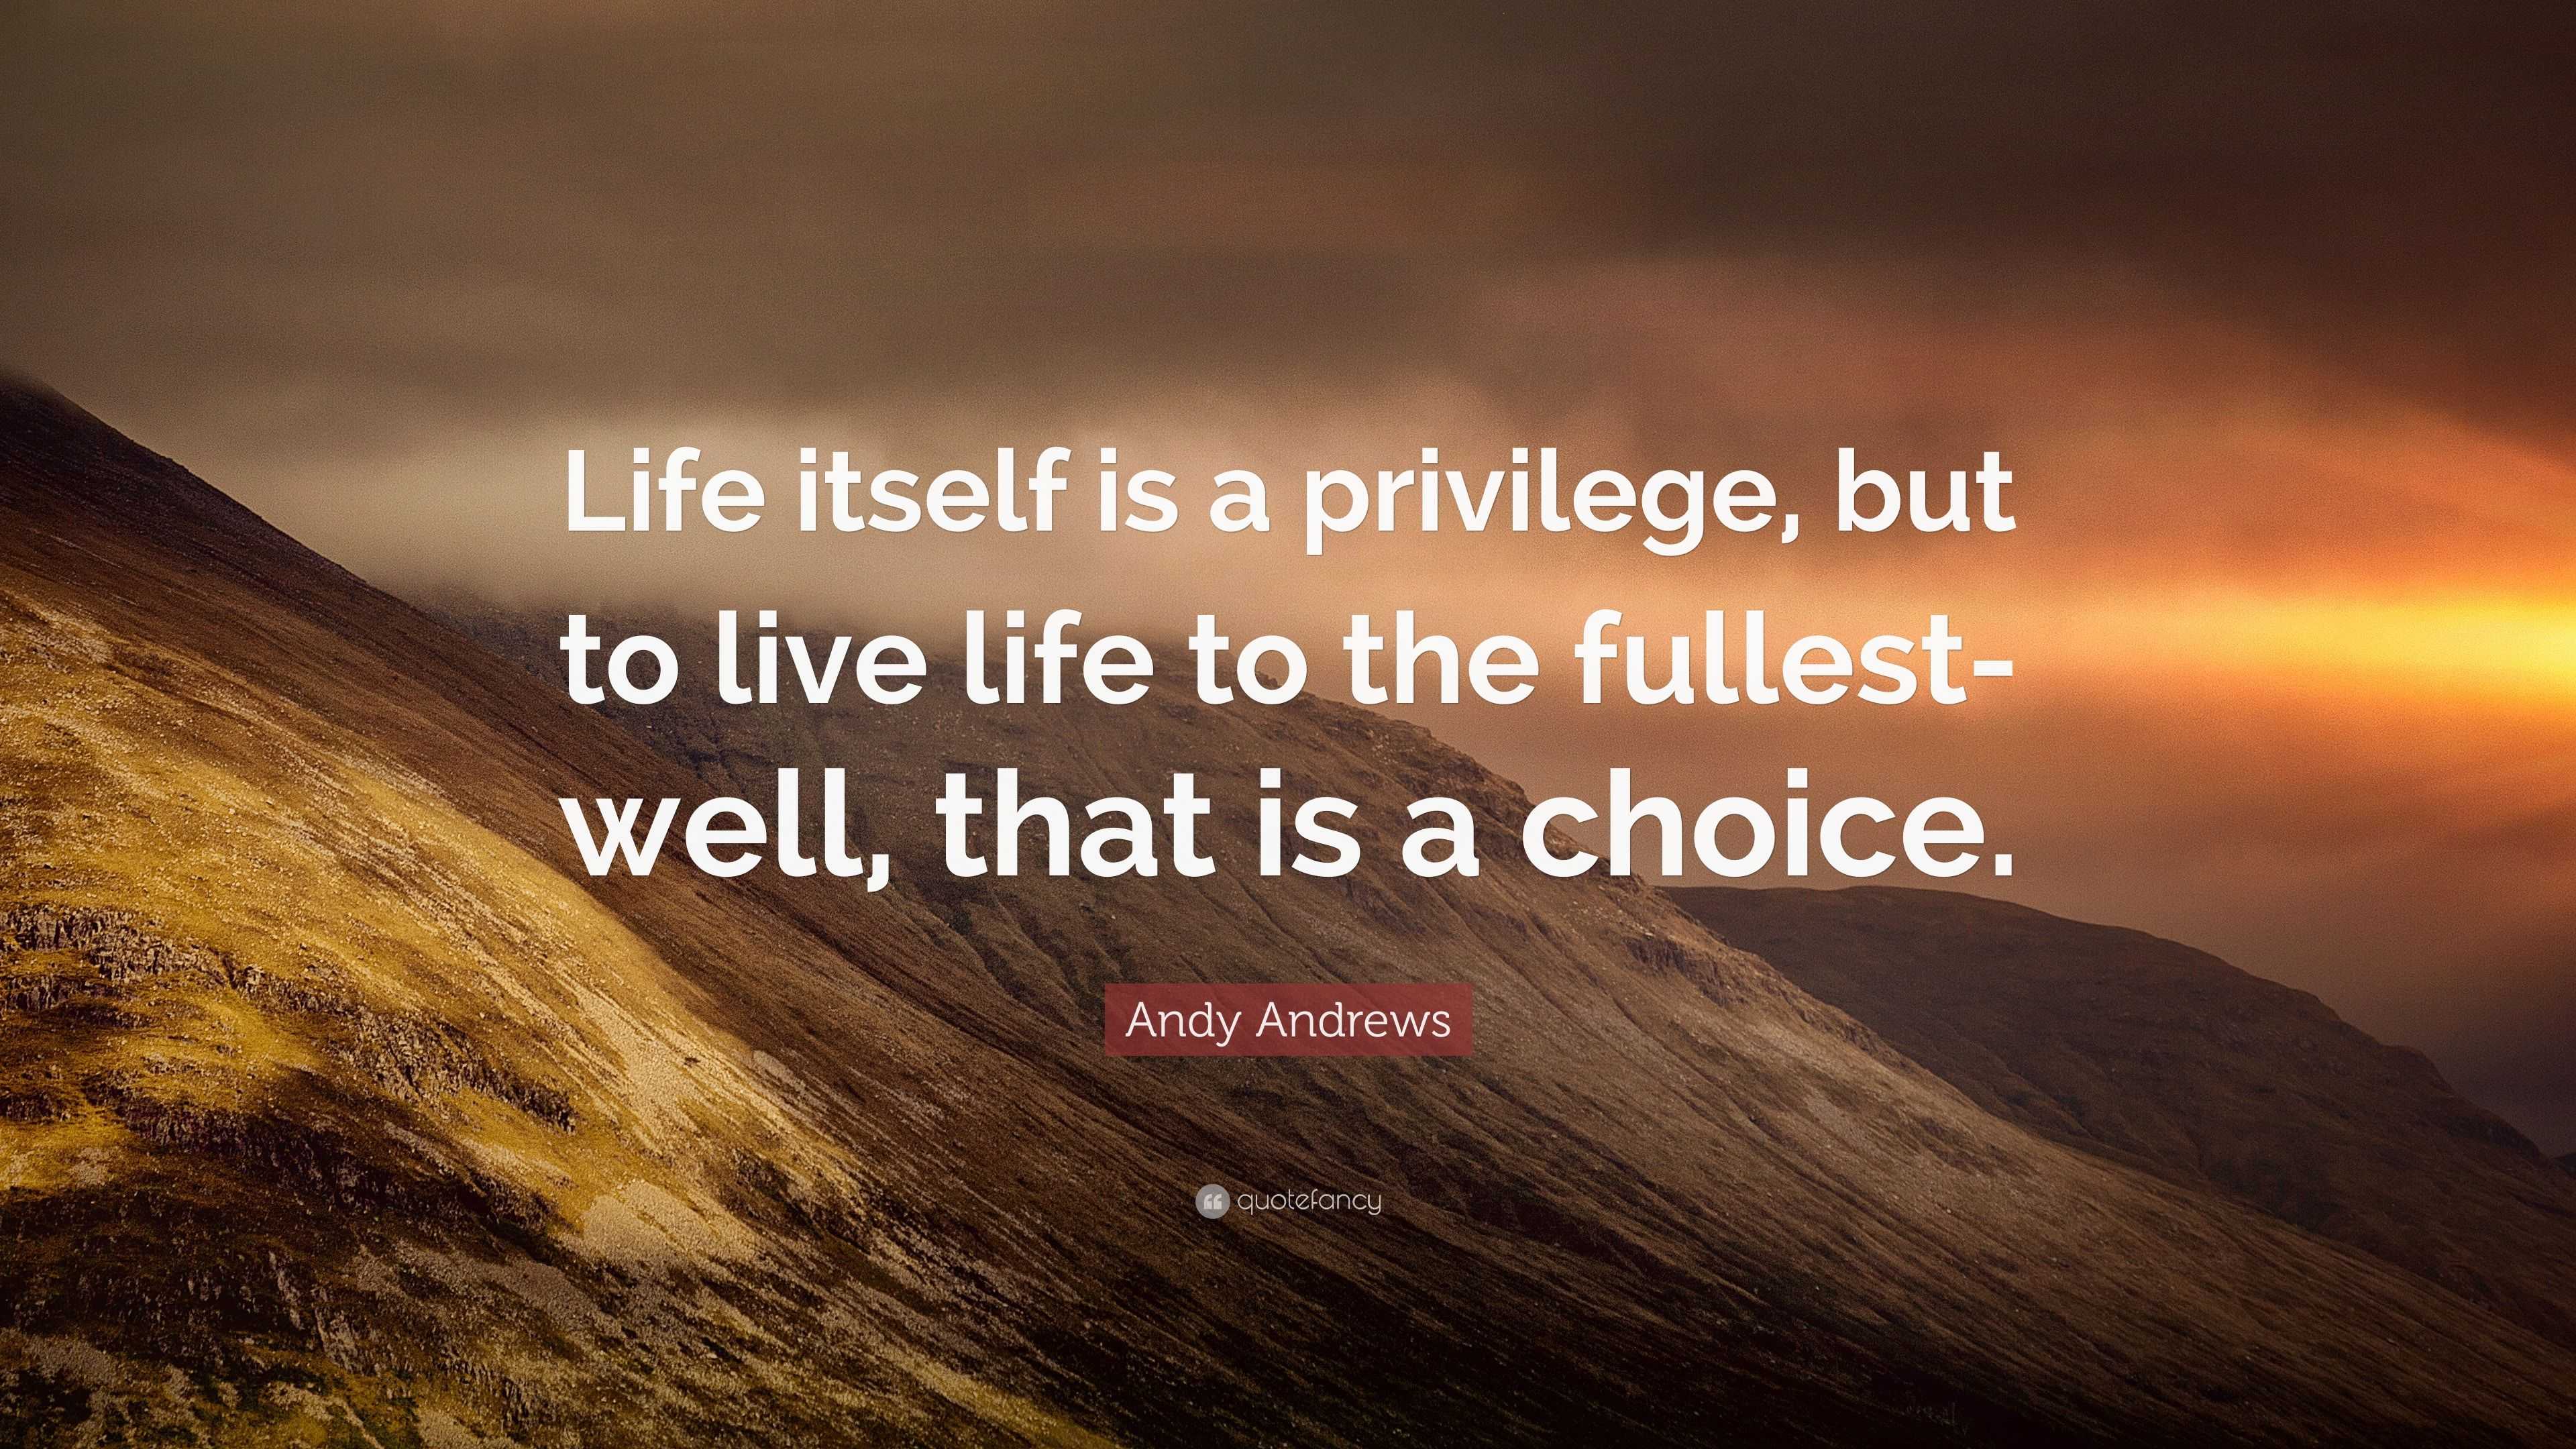 Andy Andrews Quote “Life itself is a privilege, but to